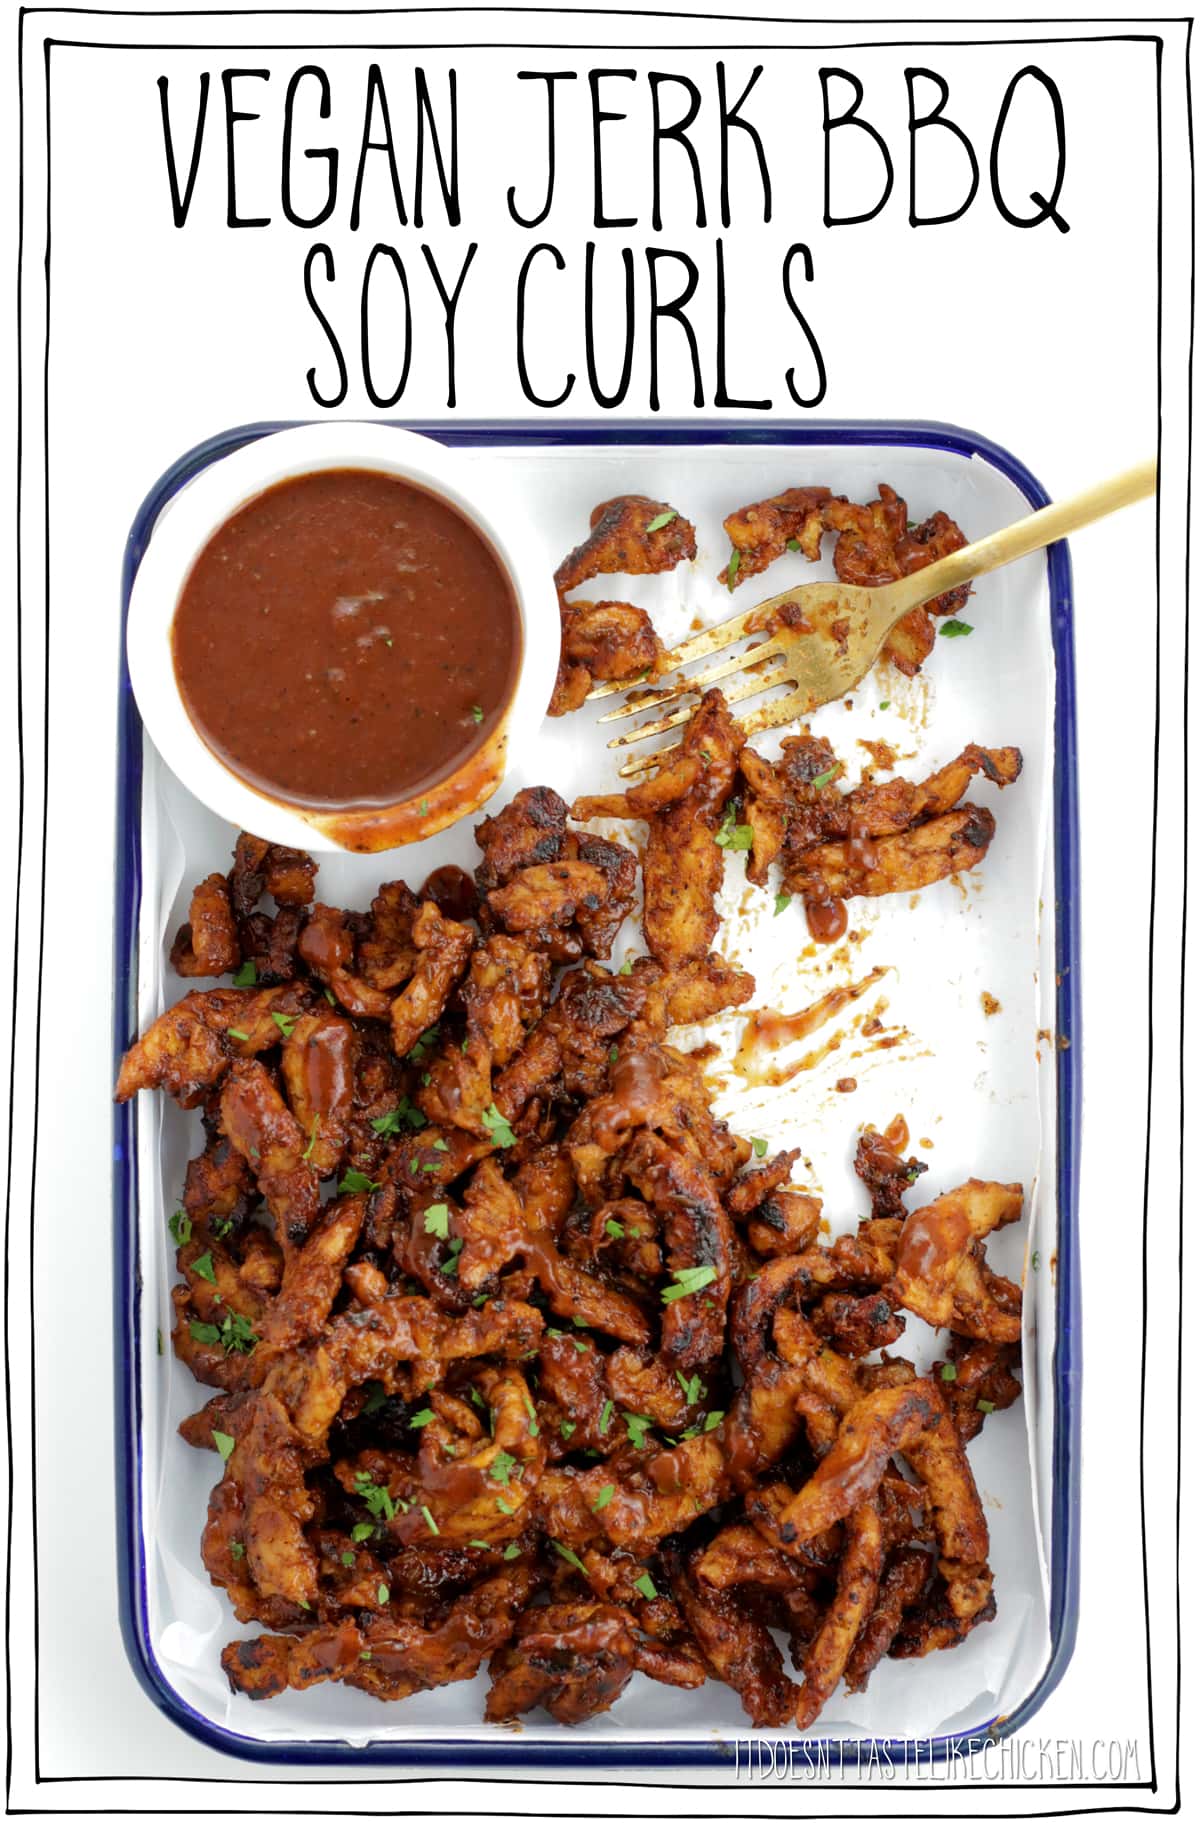 Vegan Jerk BBQ Soy Curls! 20 minutes and just 4 ingredients to make! Spicy, saucy, tender, to die for delicious. Serve them along with some rice and coleslaw, pile them high on a bun, roll them into a wrap, or top a grain bowl. #itdoesnttastelikechicken #veganrecipe #soycurls